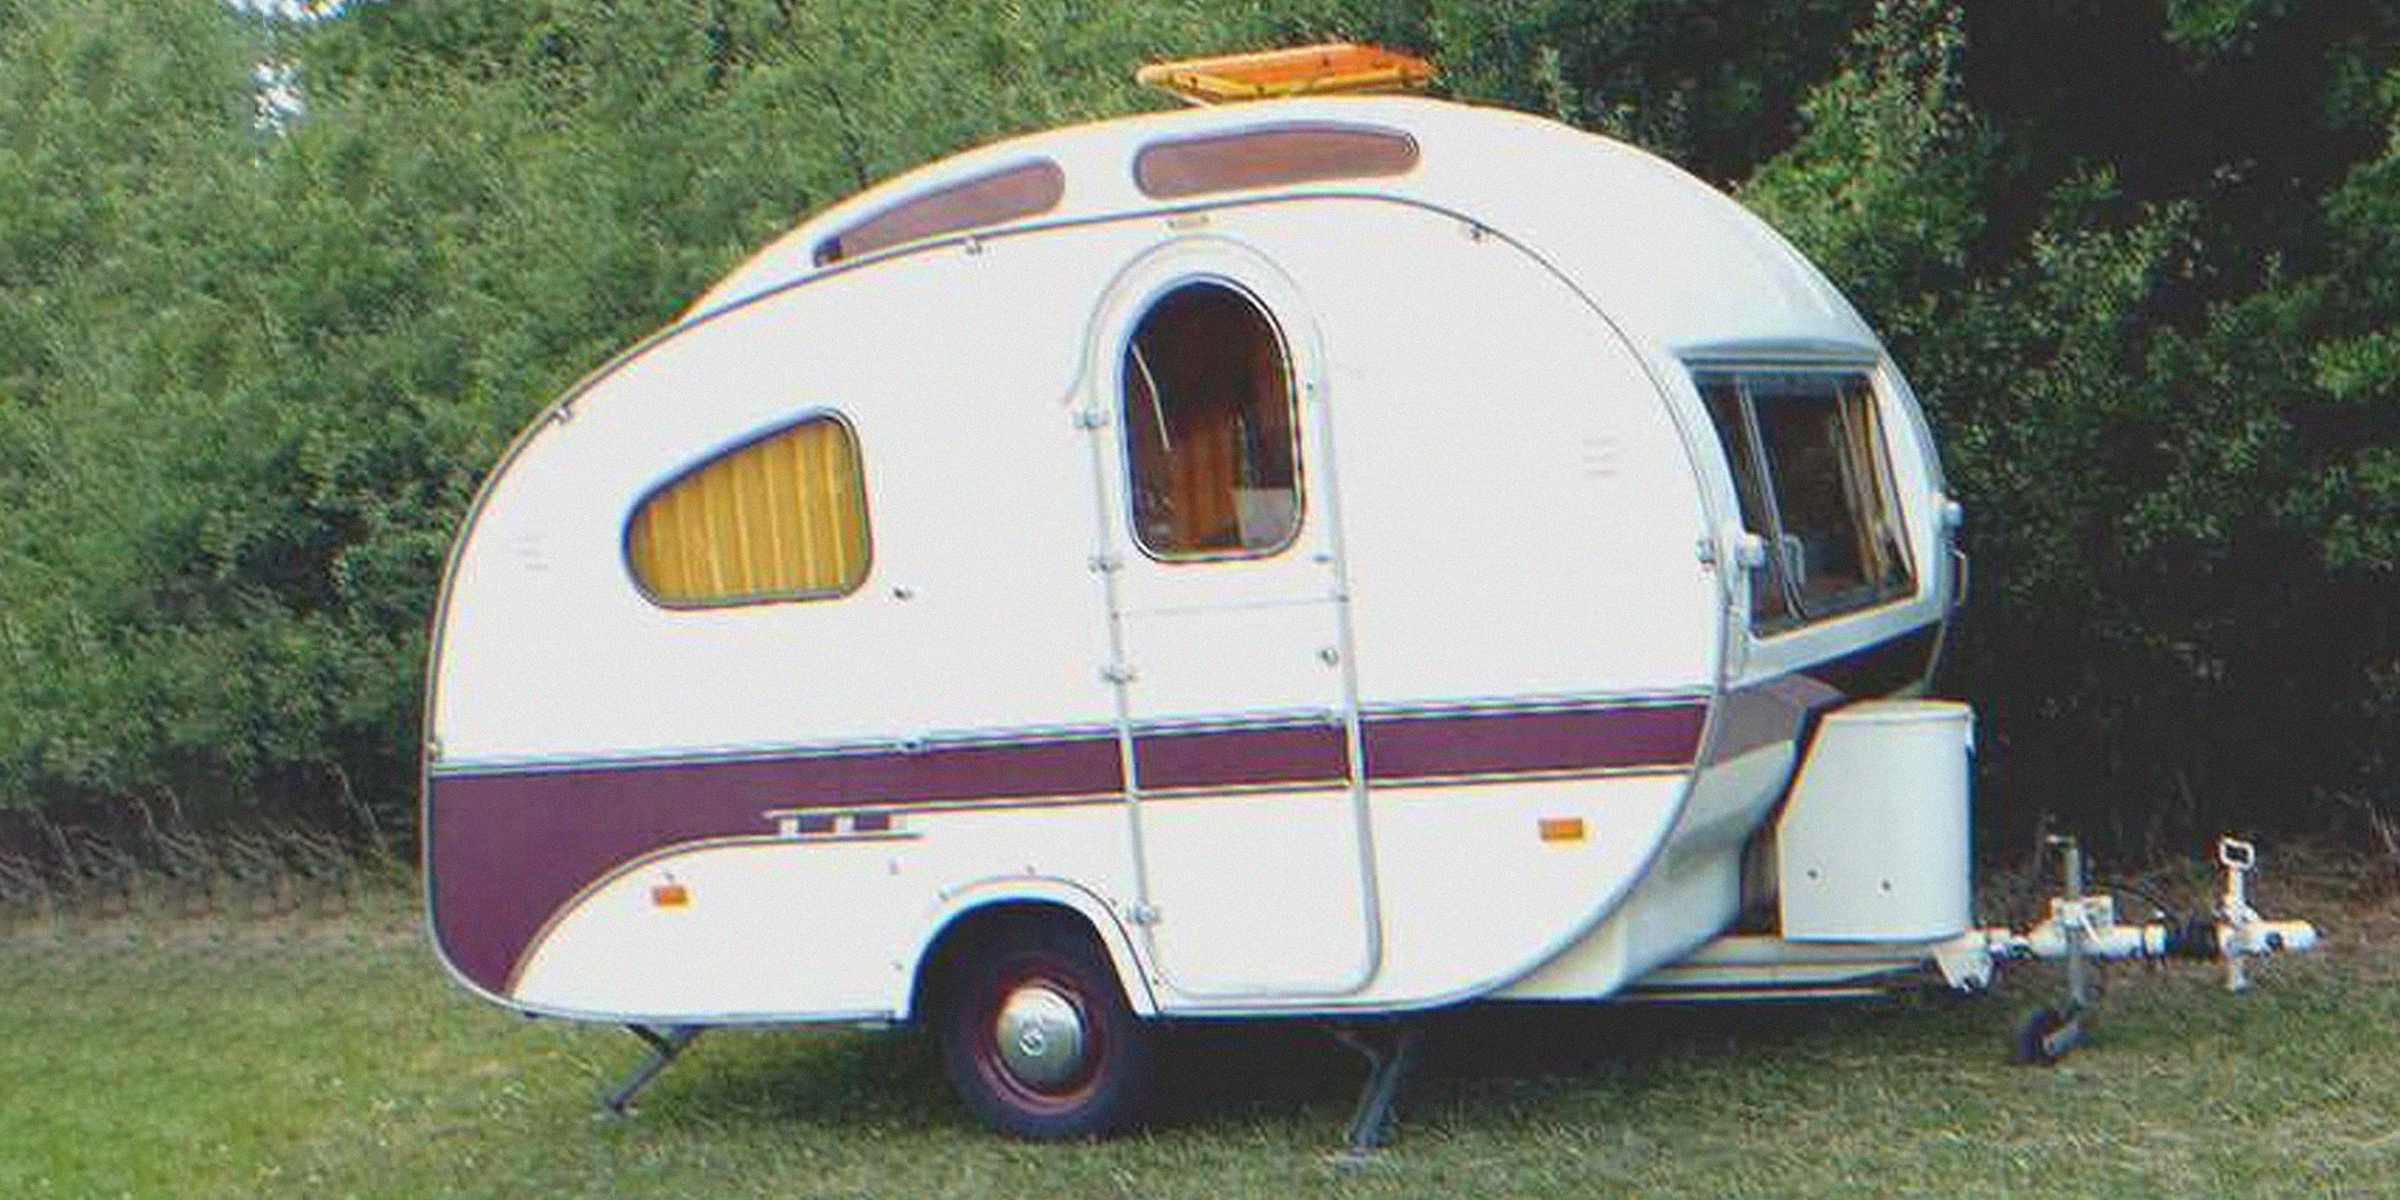 A picture of a Caravan | Source: flickr.com/"Caravan" (CC BY-SA 2.0) by MGSpiller